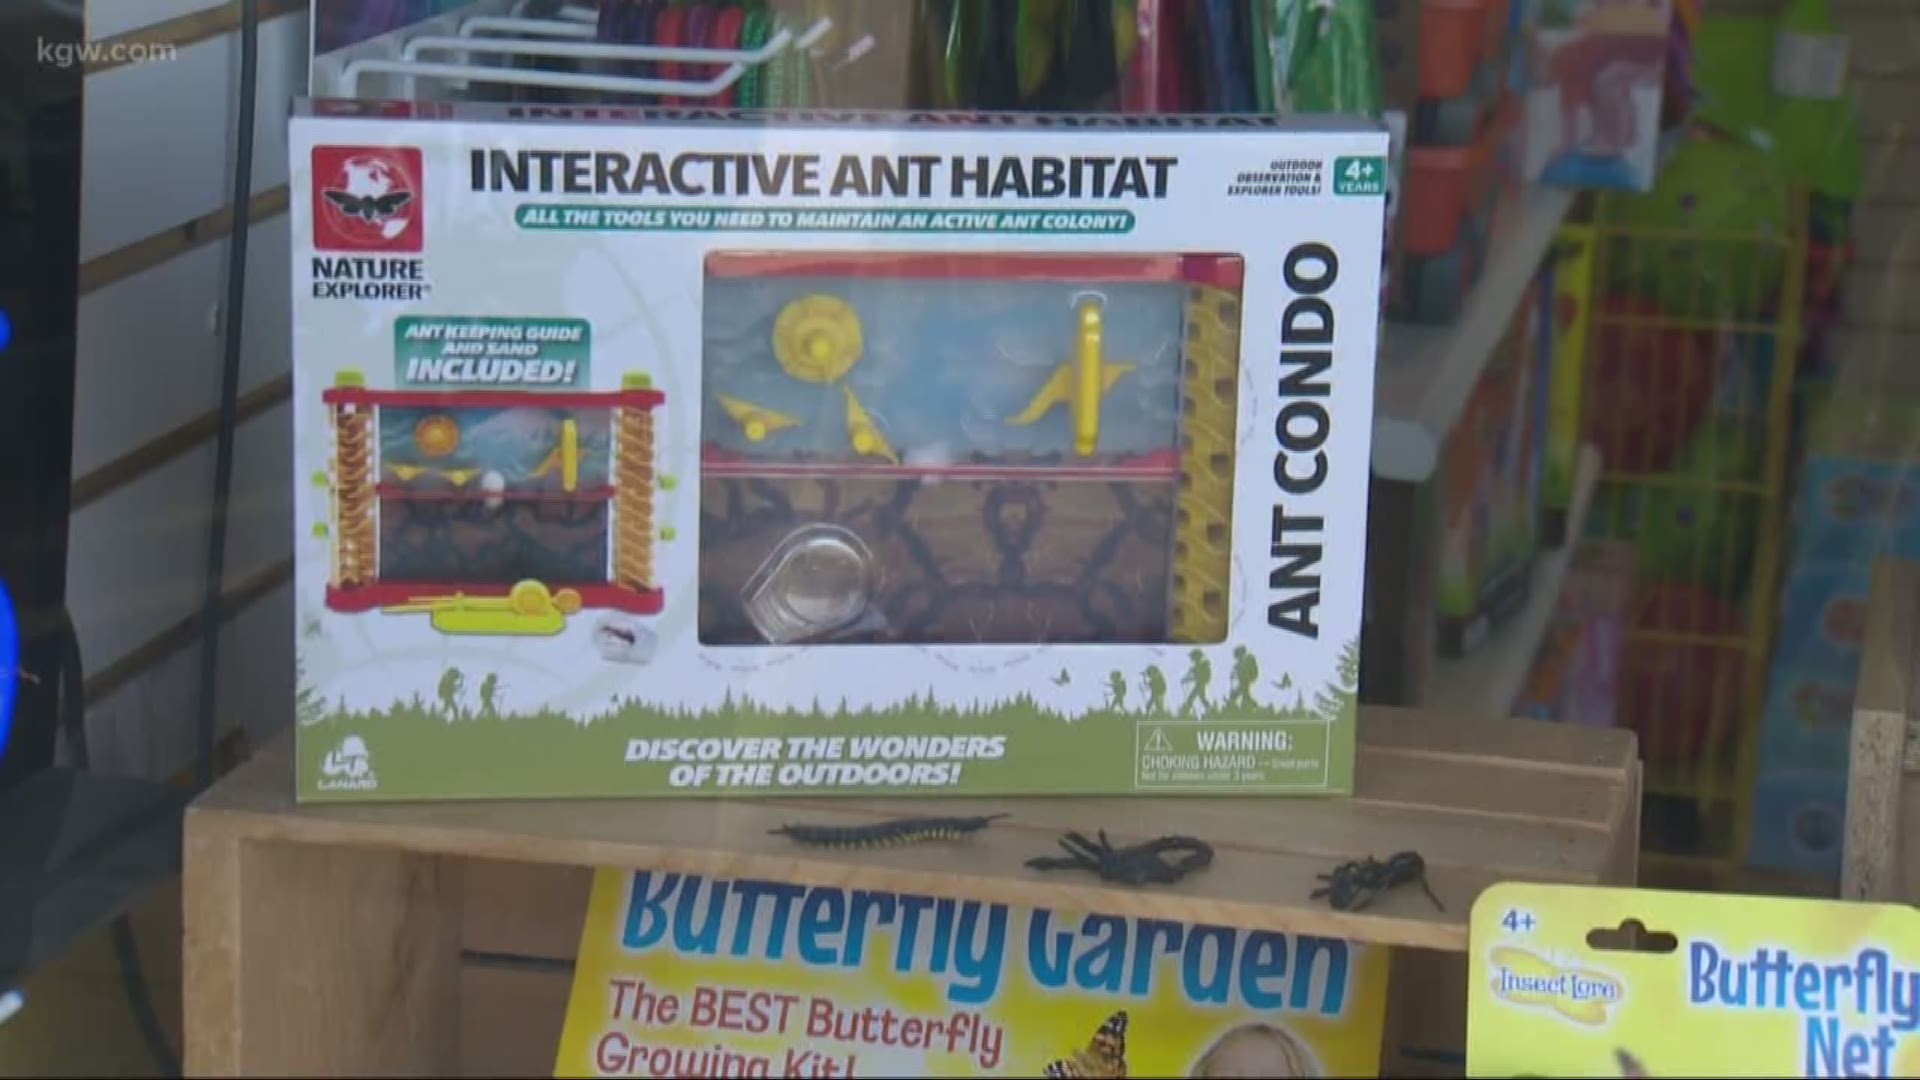 KGW's Joe Raineri talked with one business owner who's making it easier for parents to provide educational tools for their kids.